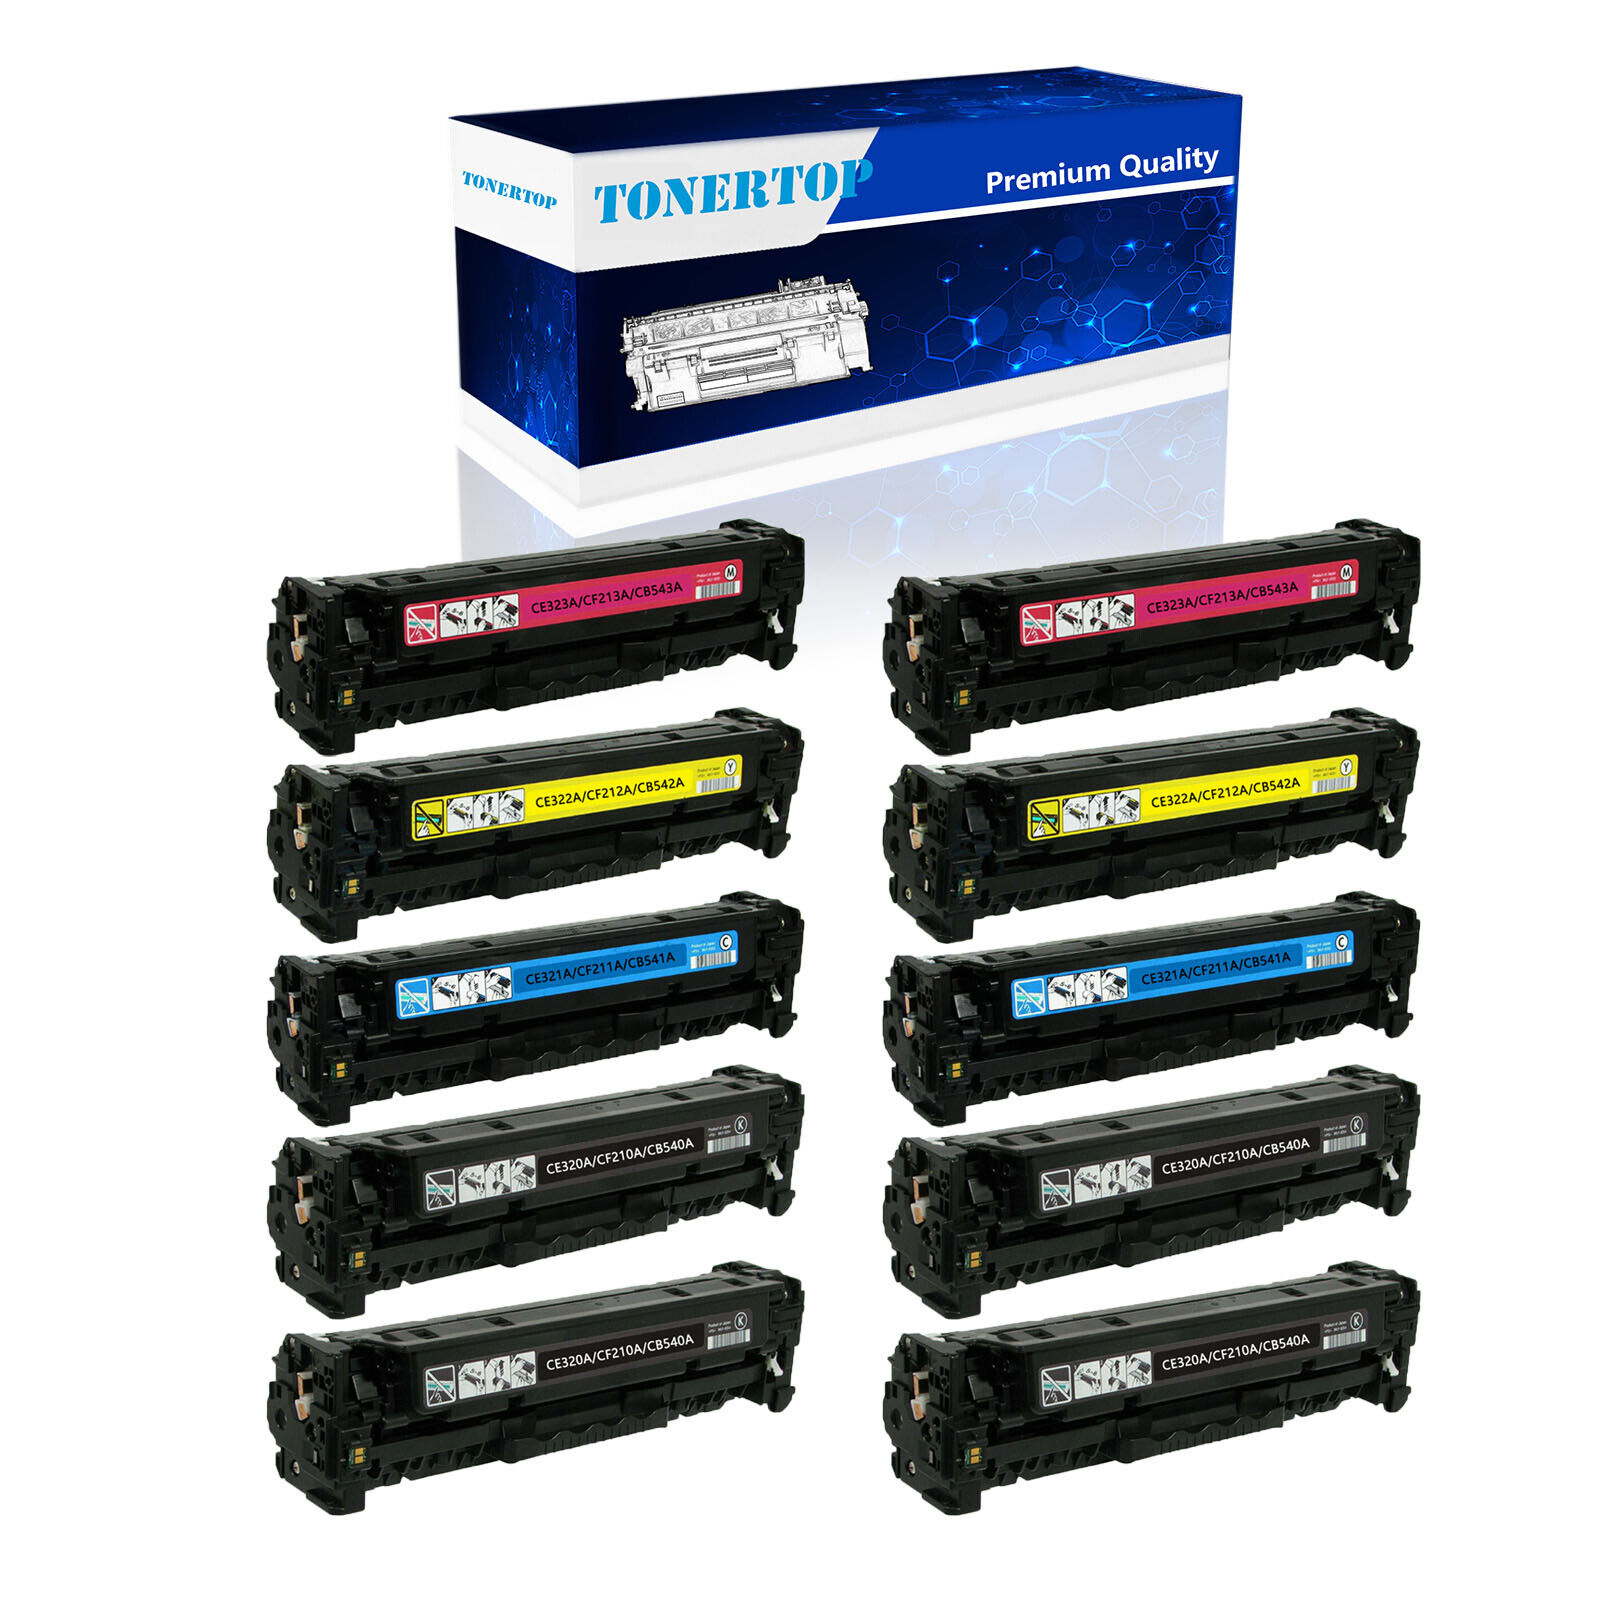 10PK CF210A Color Toner for HP 131A LaserJet Pro 200 M251nw M276nw MFP Printer